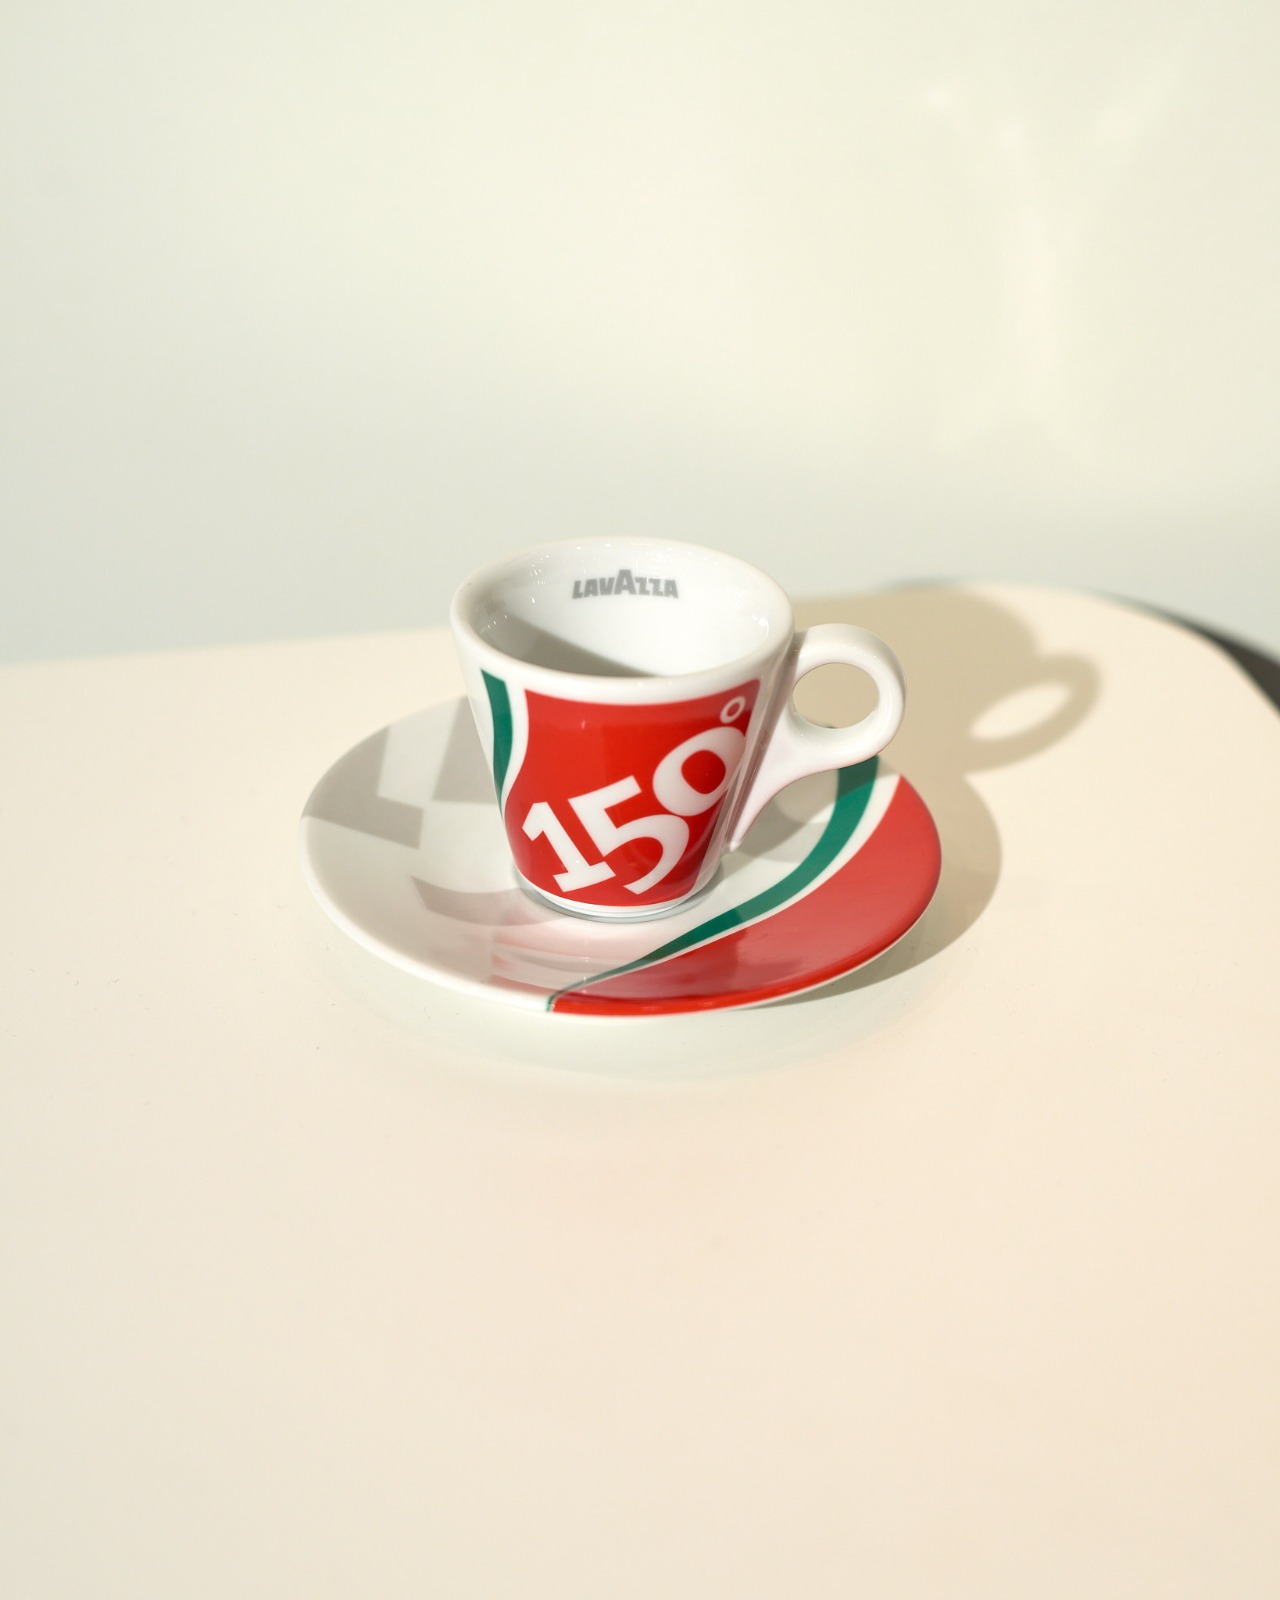 Lavazza Limited Edition Espresso Cup and Saucer Set